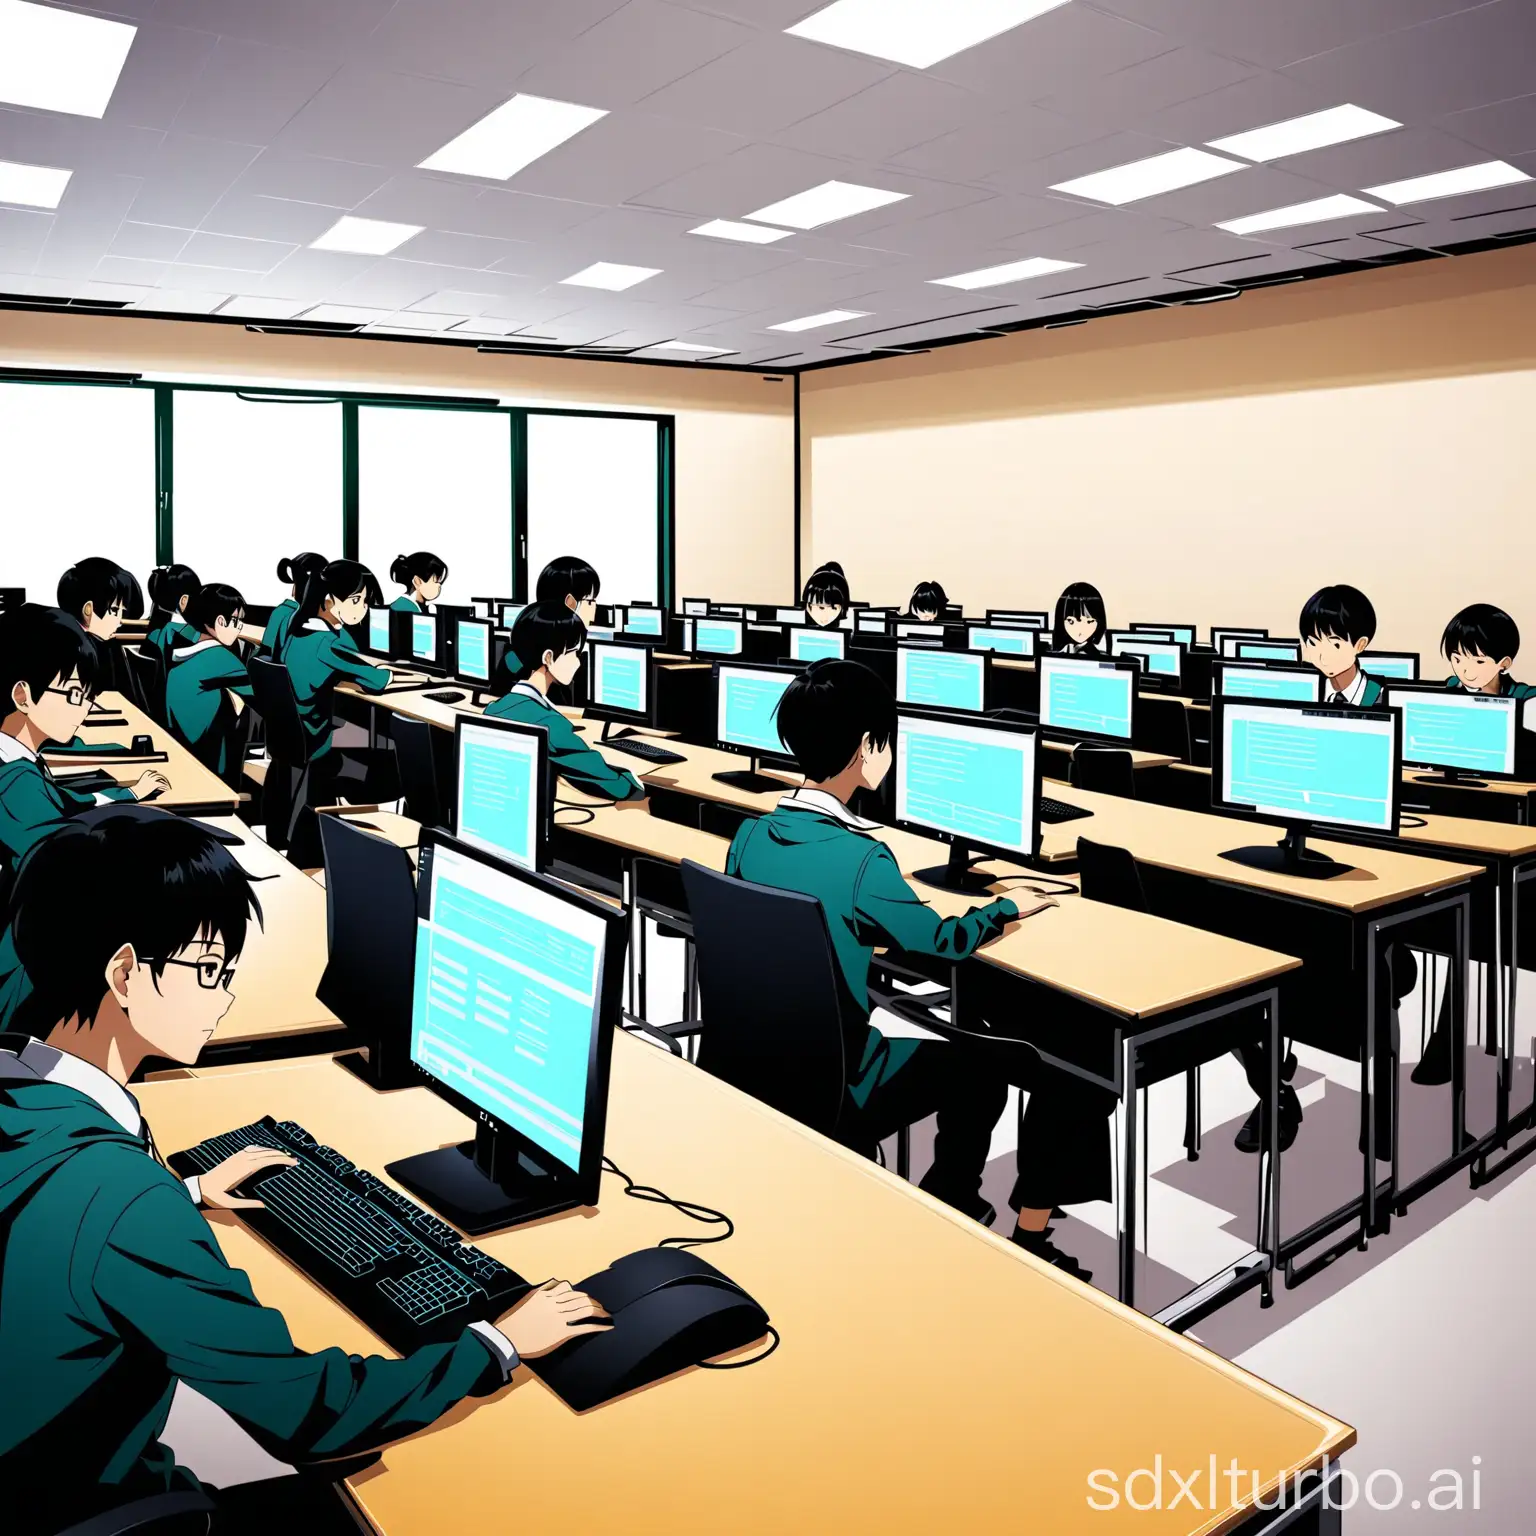 Students are in the computer classroom for class